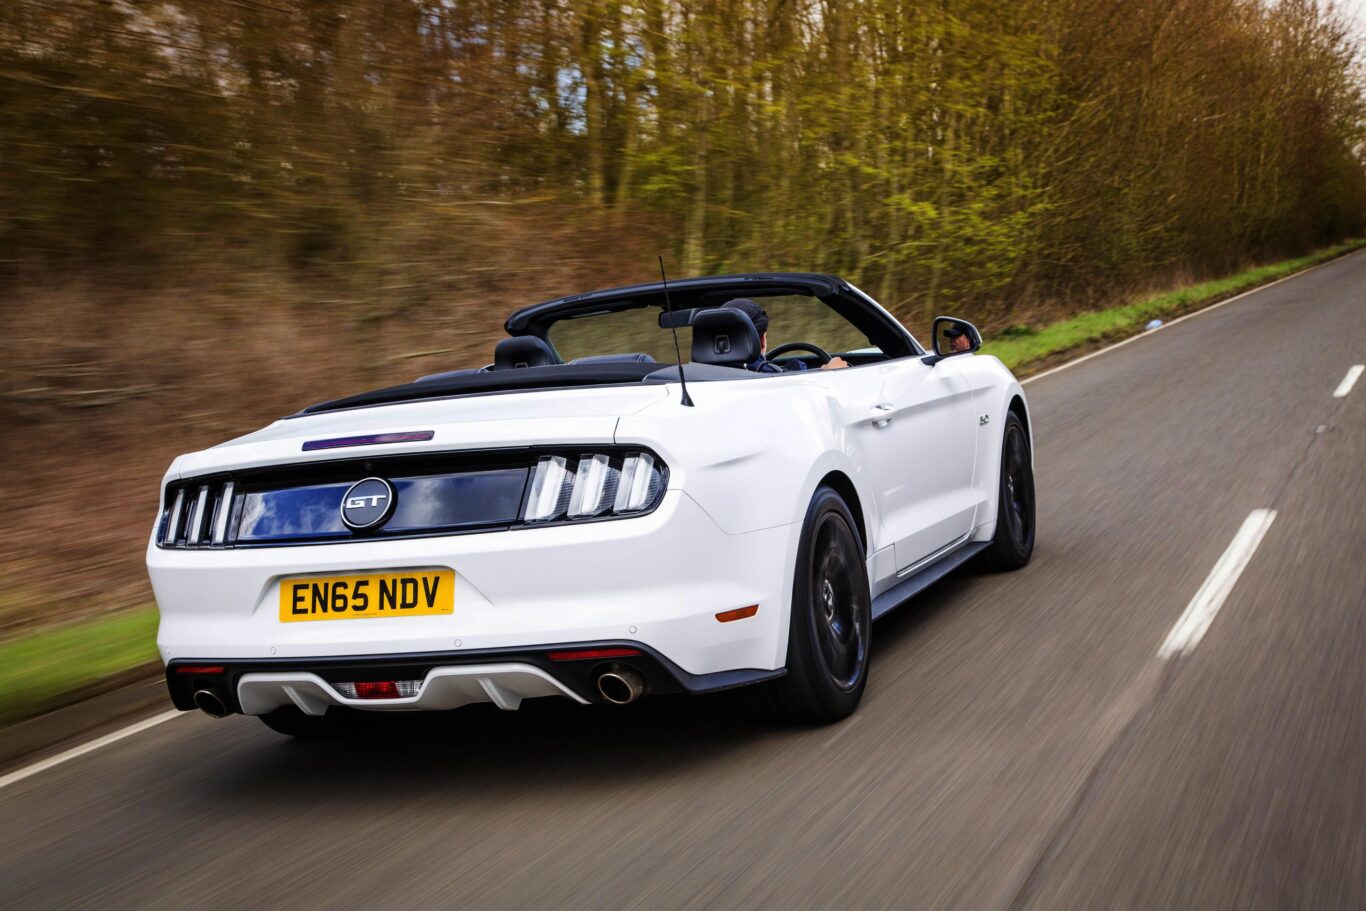 The Mustang brings old-school muscle car charm to the UK